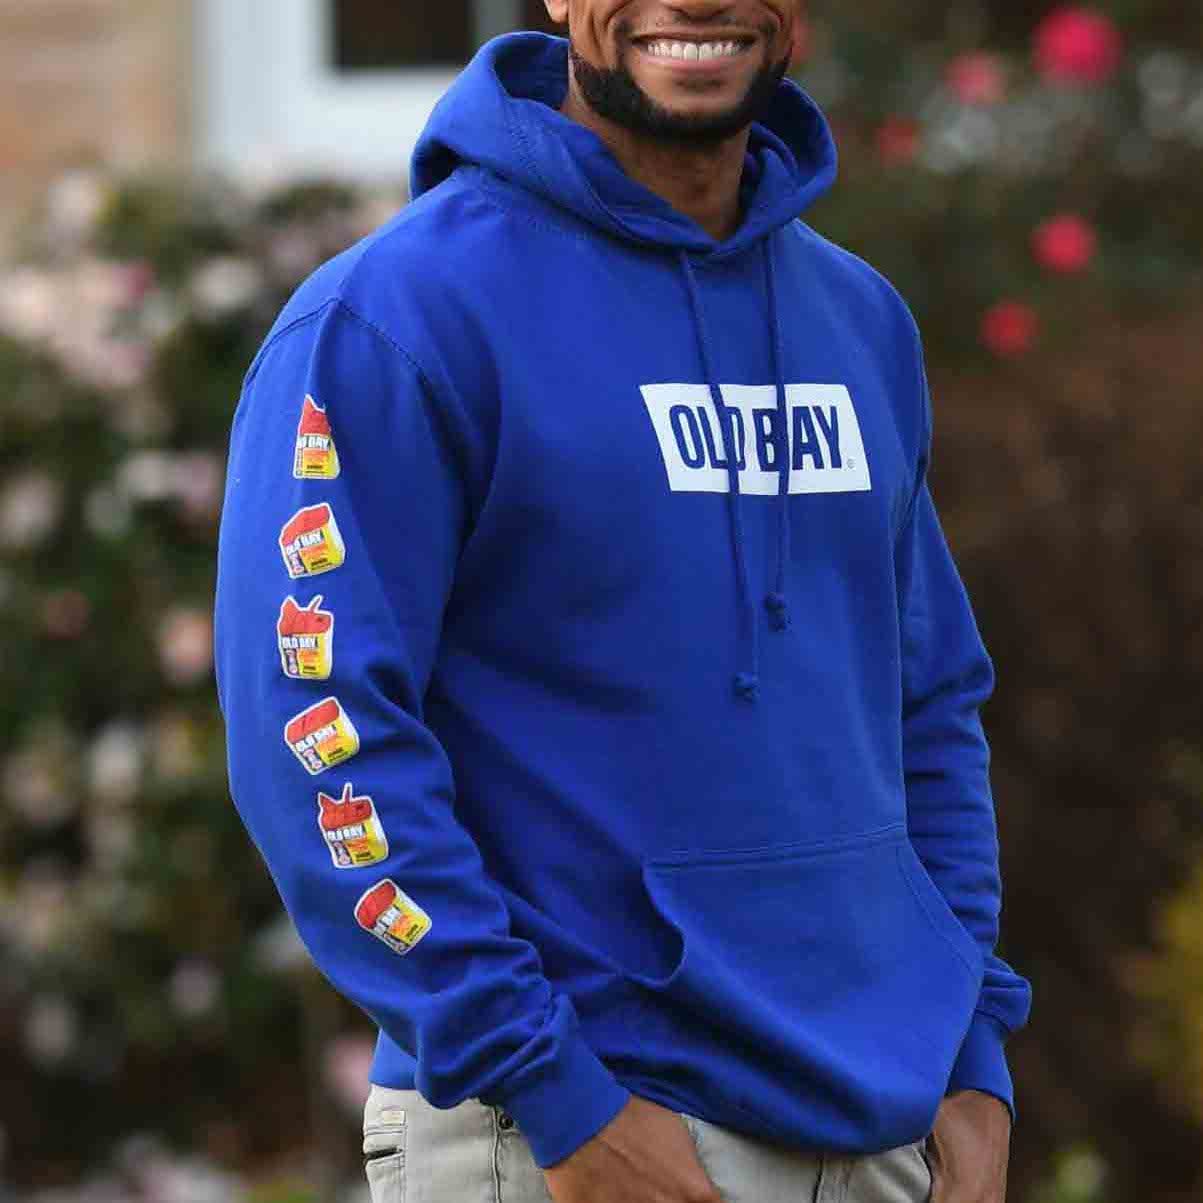 Old Bay - Can Pattern Sleeve (Royal) / Hoodie - Route One Apparel